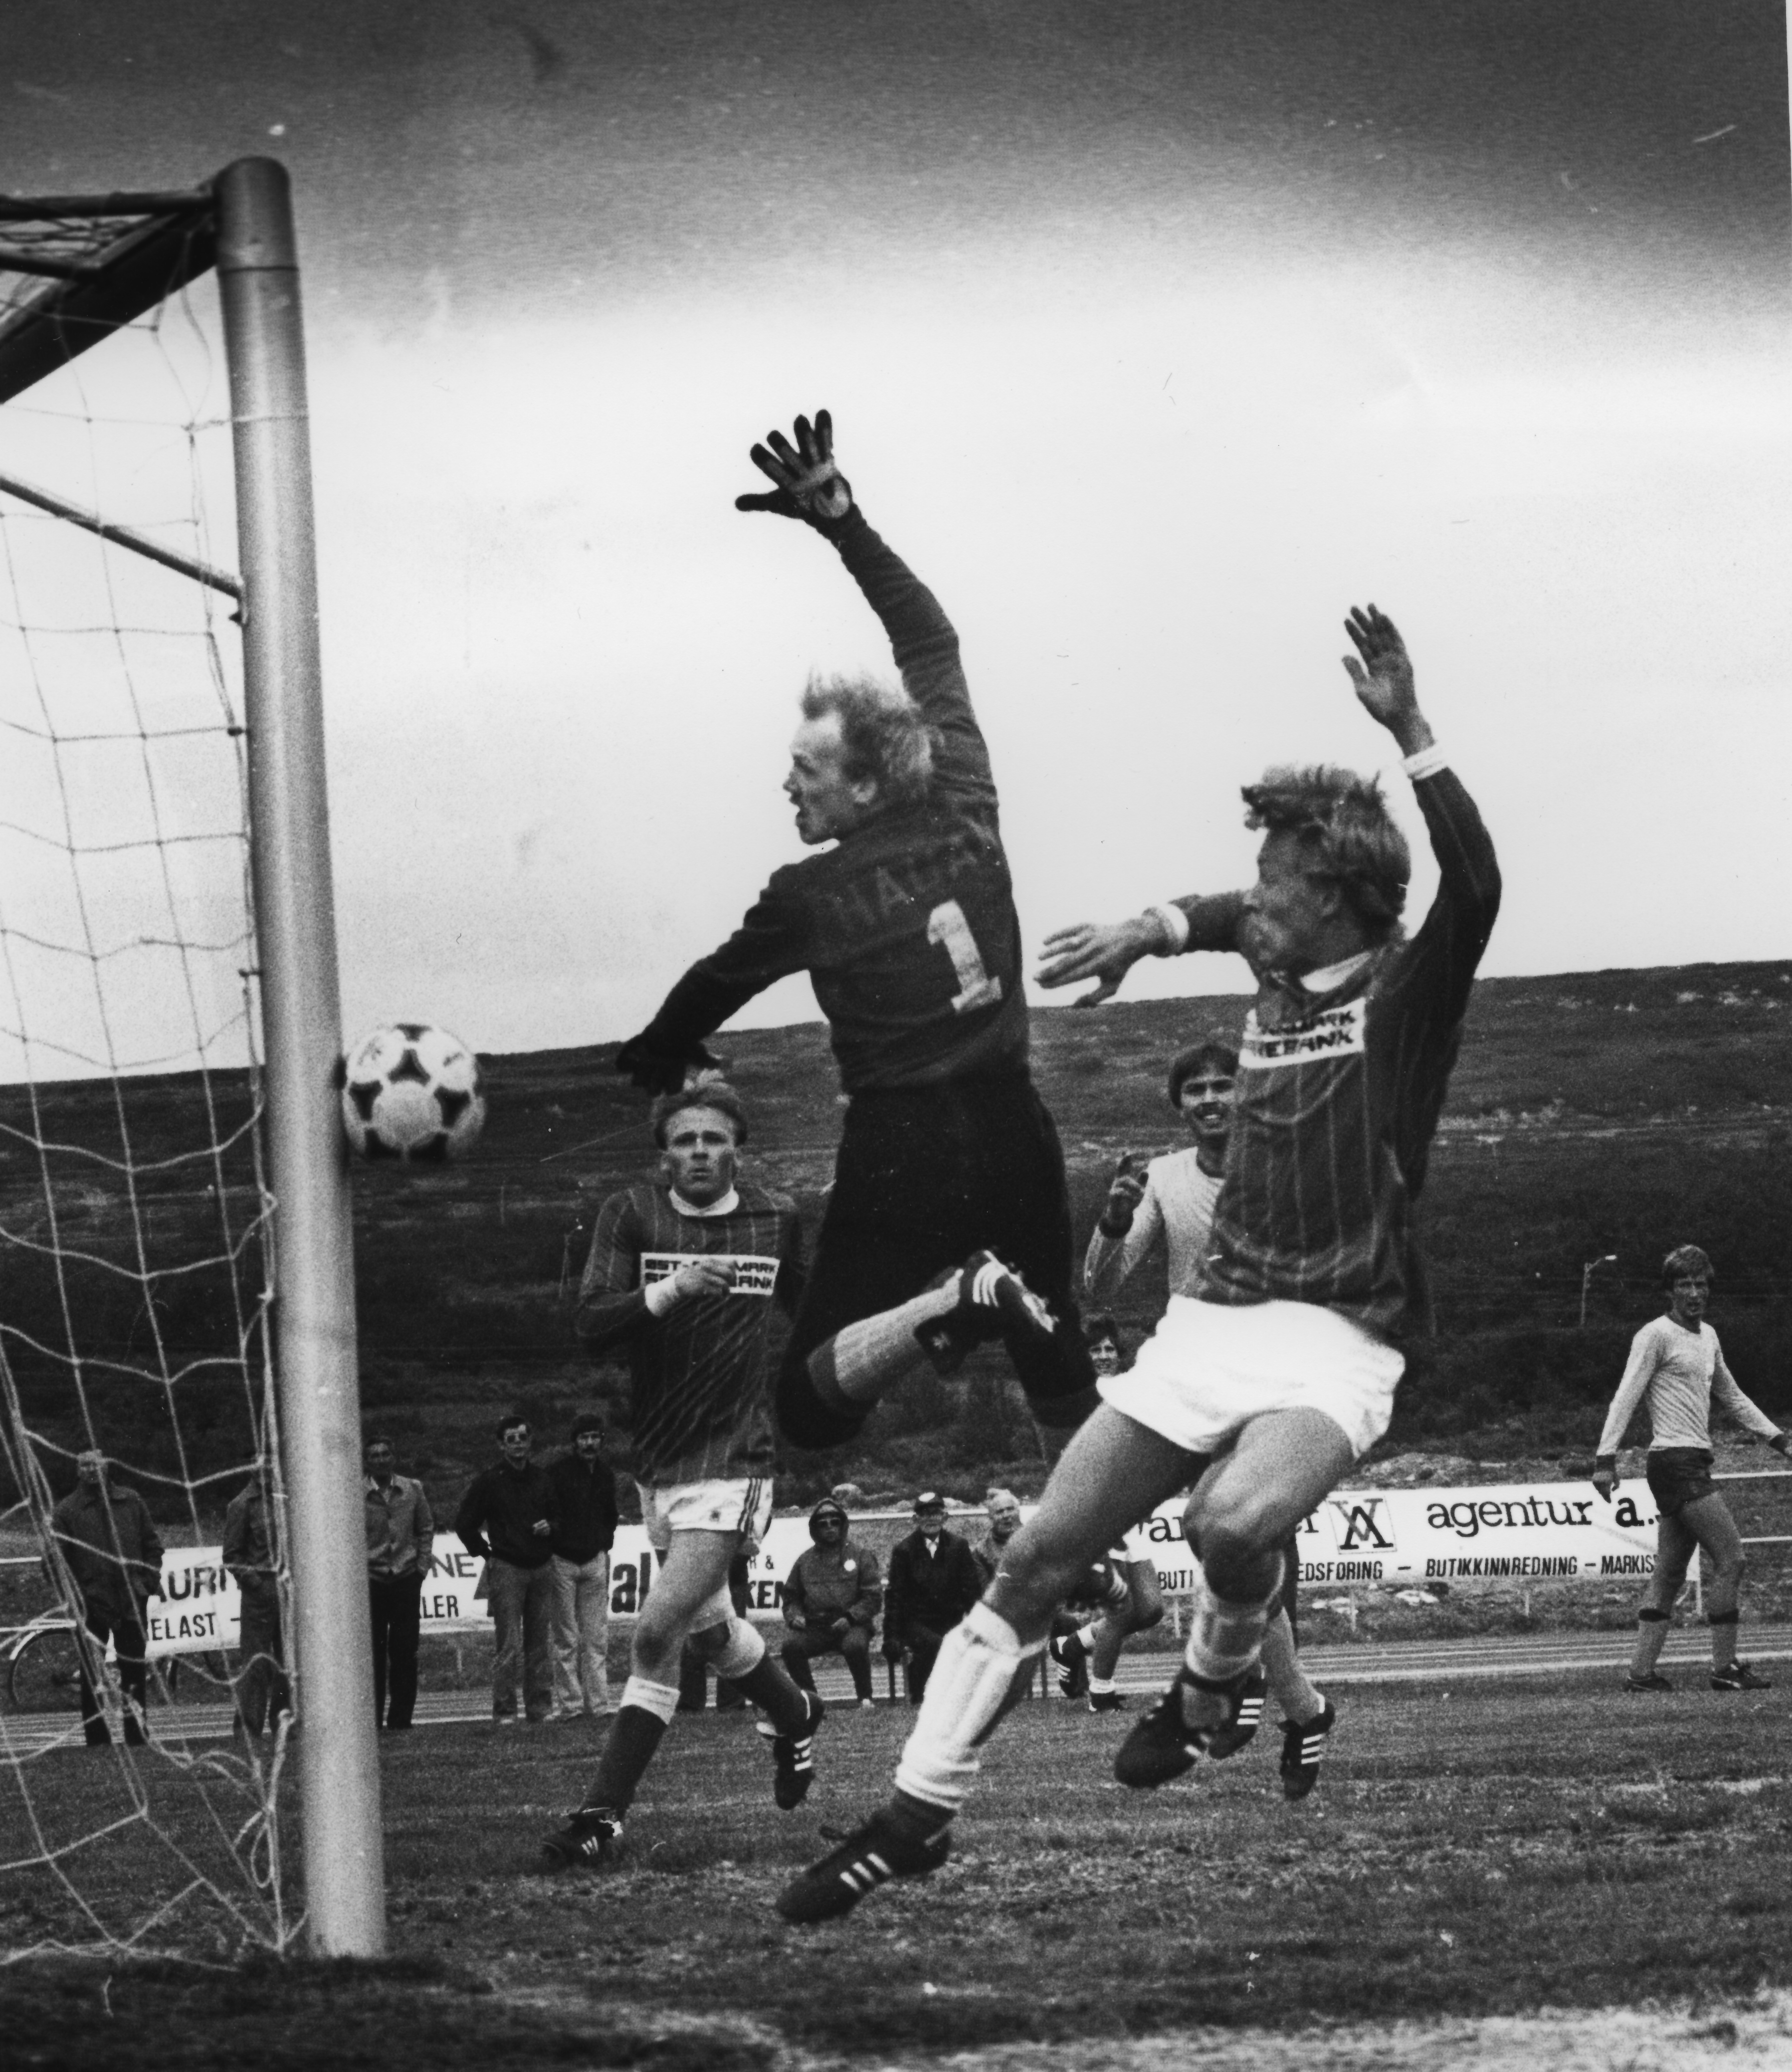 Working as freelance press photographer while at filmschool in the early eighties. Perfect timing hitting the trigger on the Nikon while covering a soccer game in Vadsø, Finnmark - two hours from the Russian border